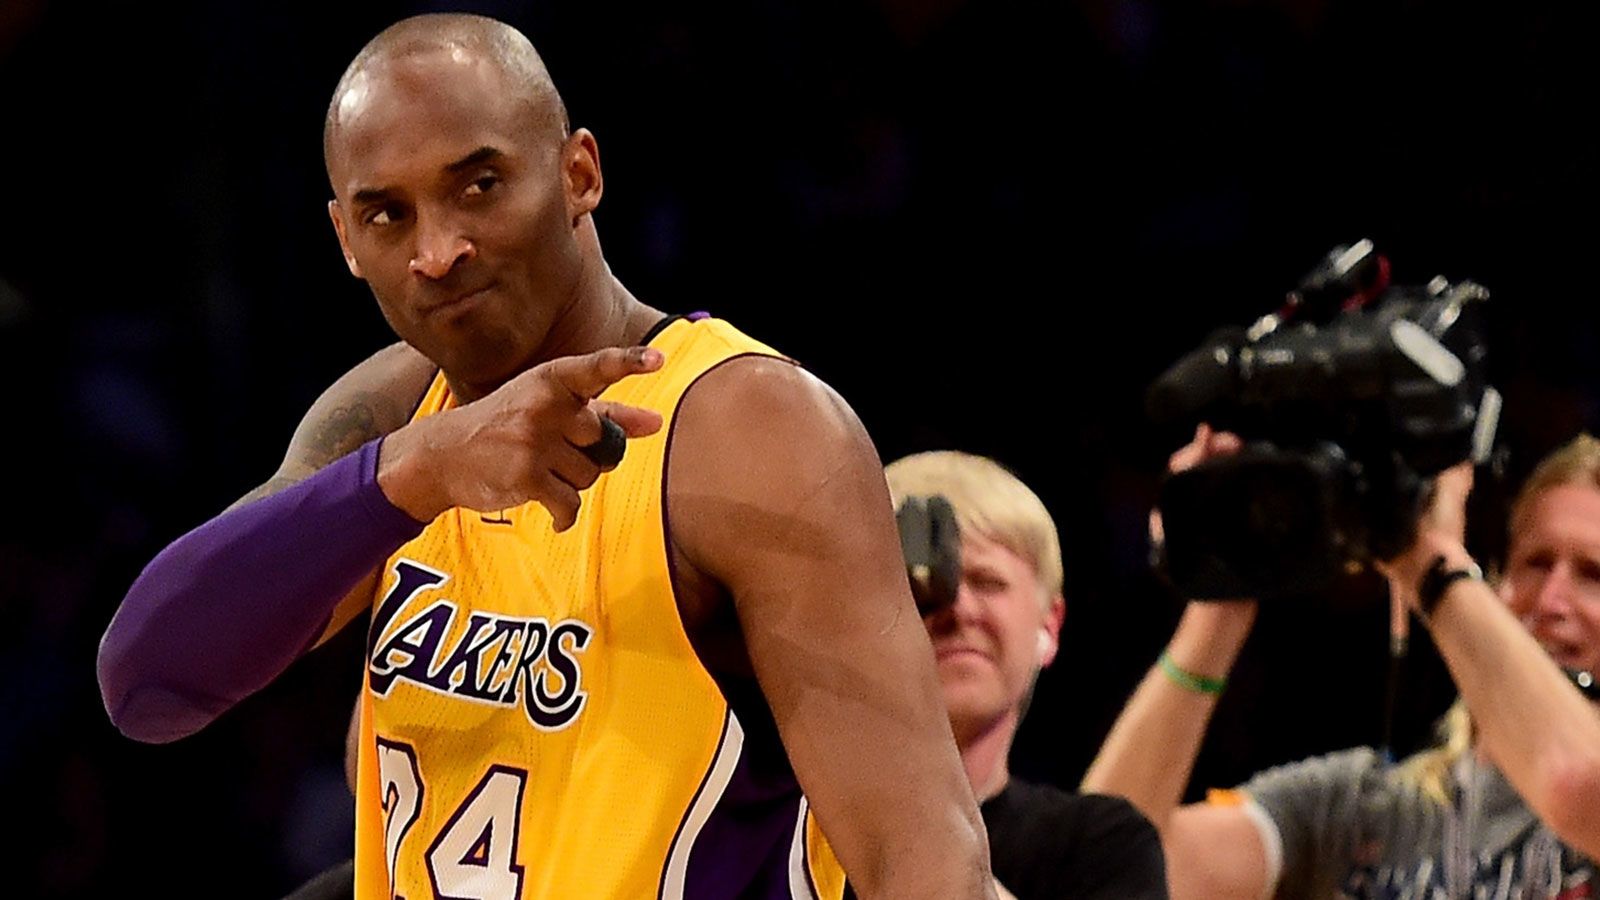 What is the name of the documentary produced and narrated by Kobe Bryant?